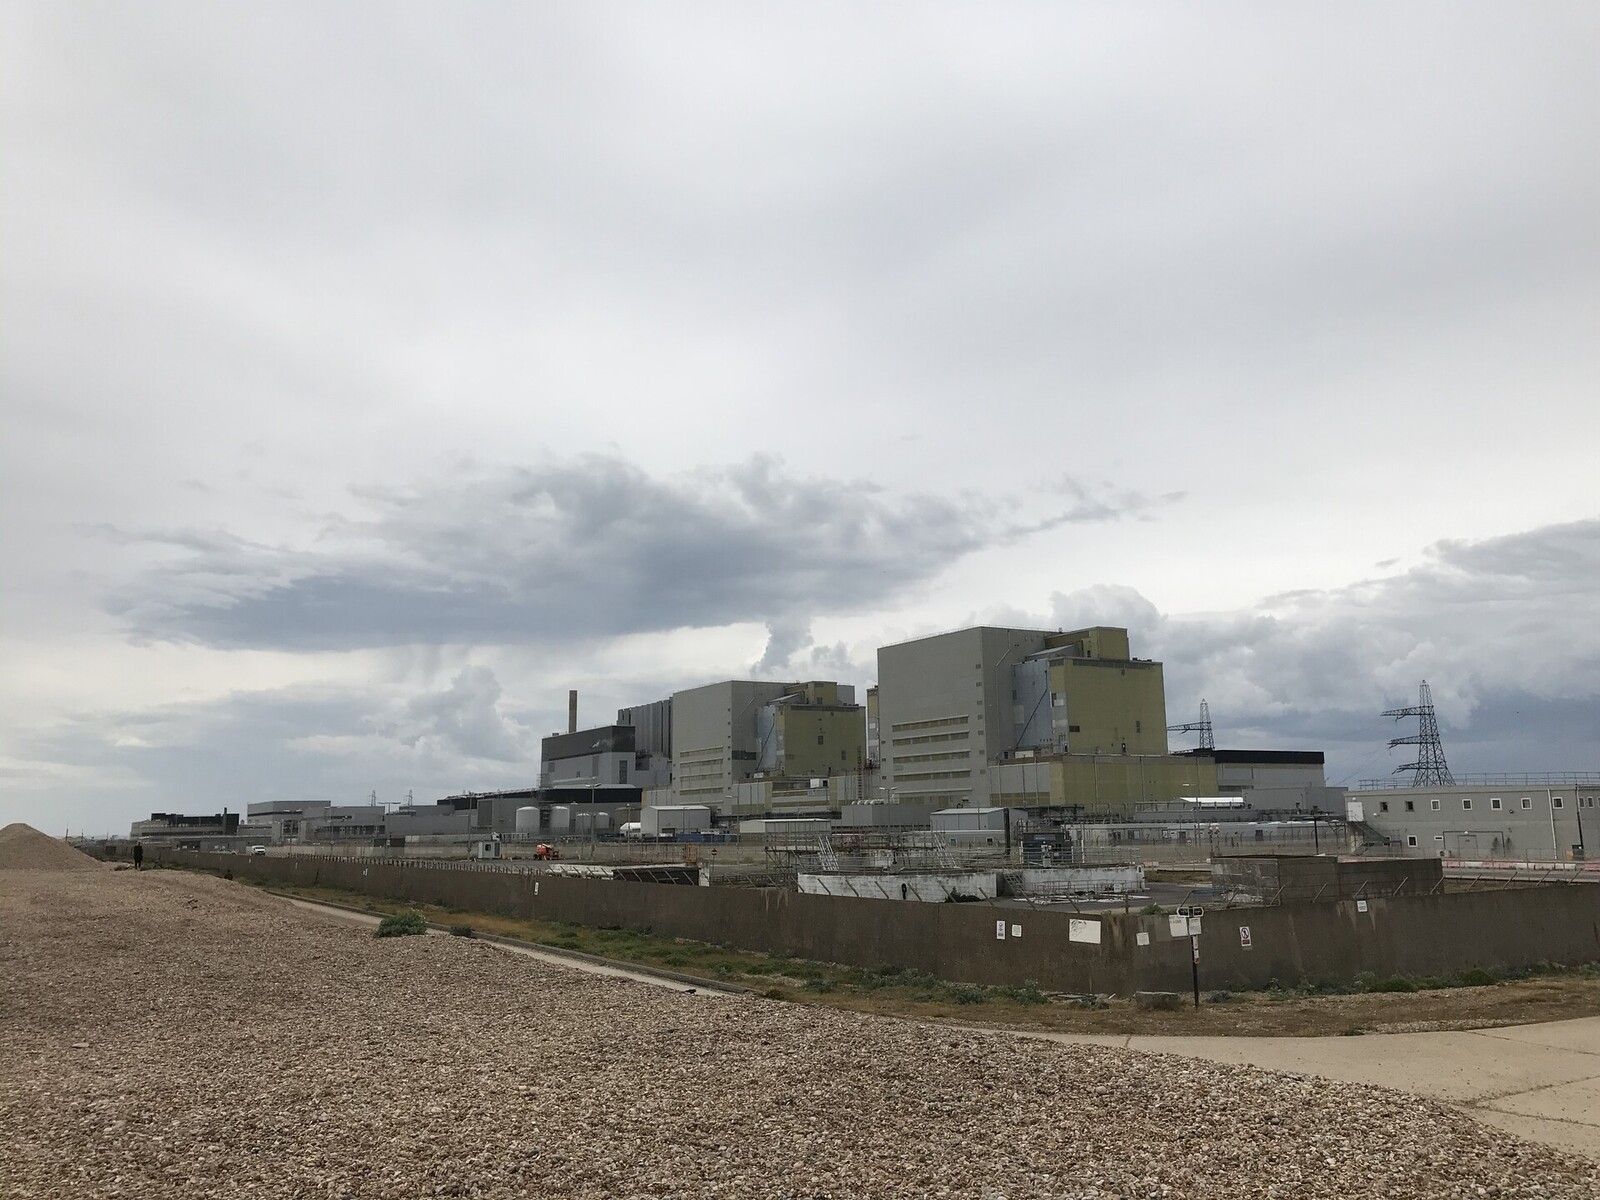 And here’s the original photo I took of the power station in Dungeness 